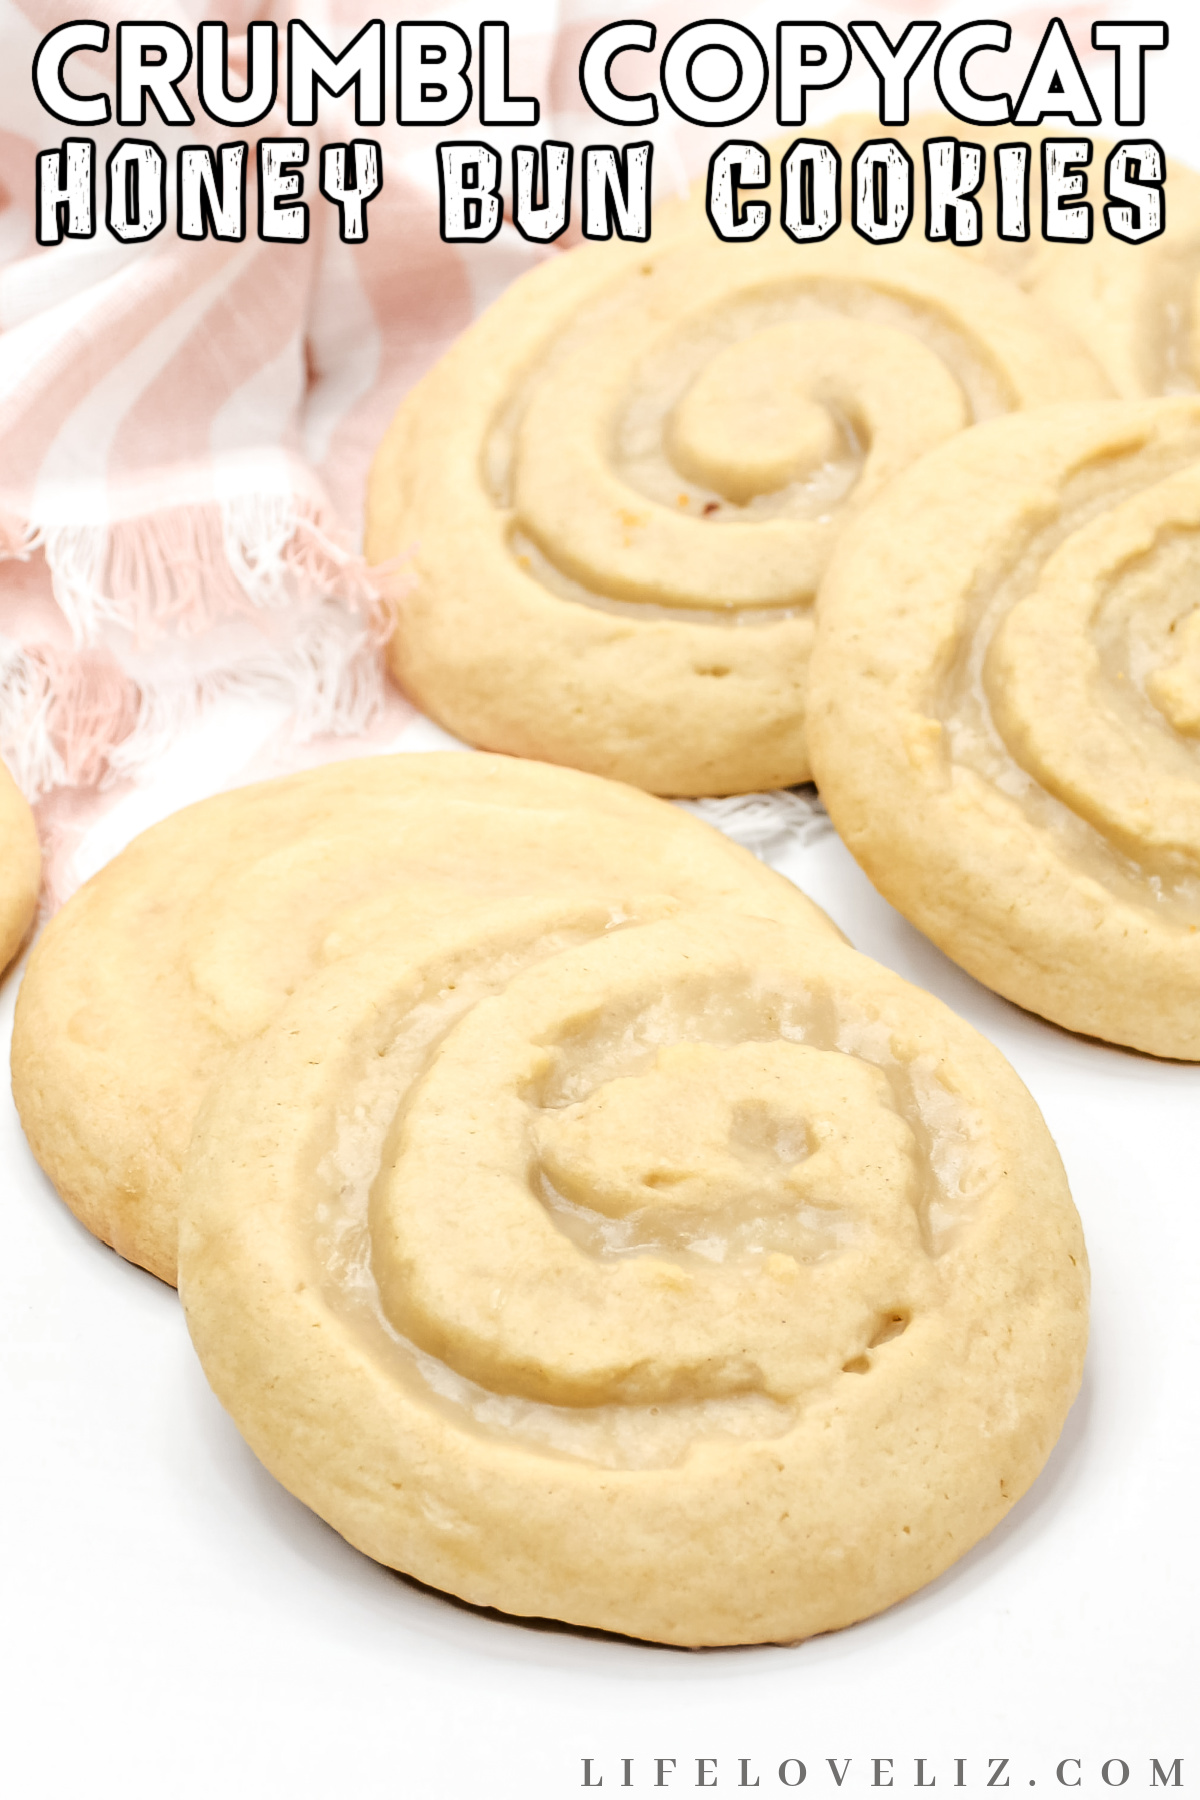 Love the Honey Bun Cookies from Crumbl? This copycat recipe is just as delicious, and so easy to make with simple pantry ingredients!